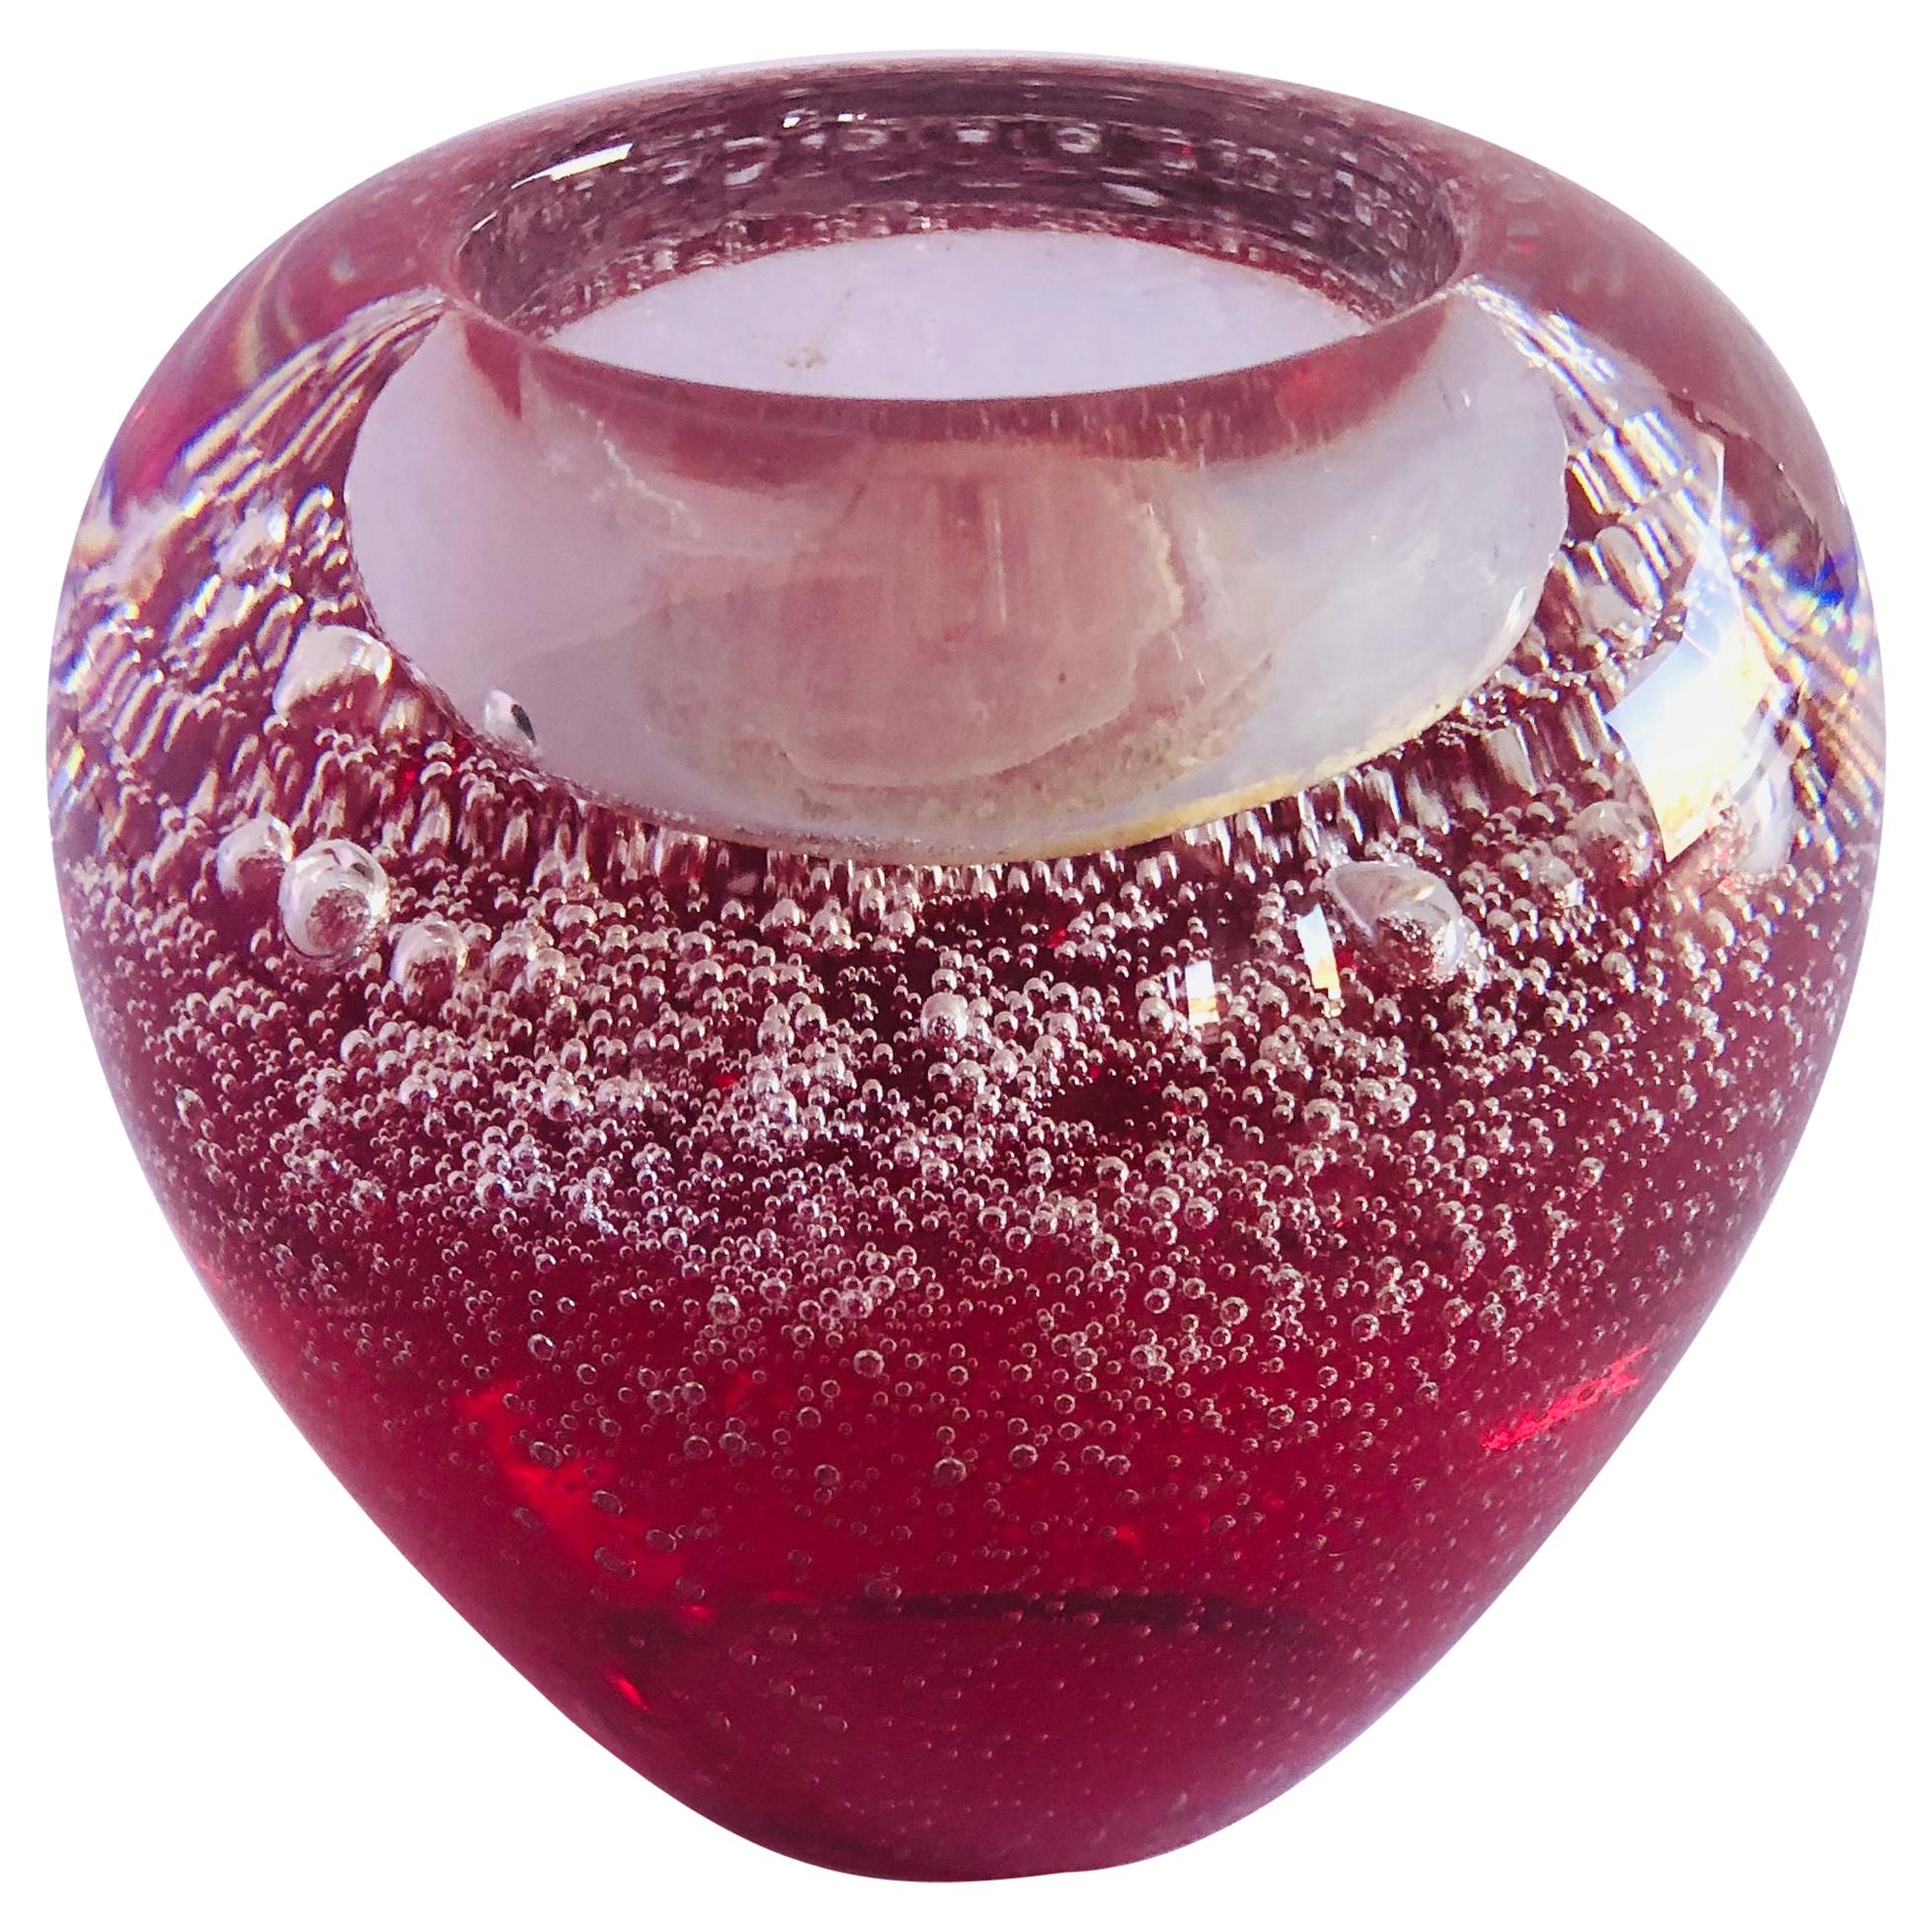 Red Murano Tealight Holder FINAL CLEARANCE SALE